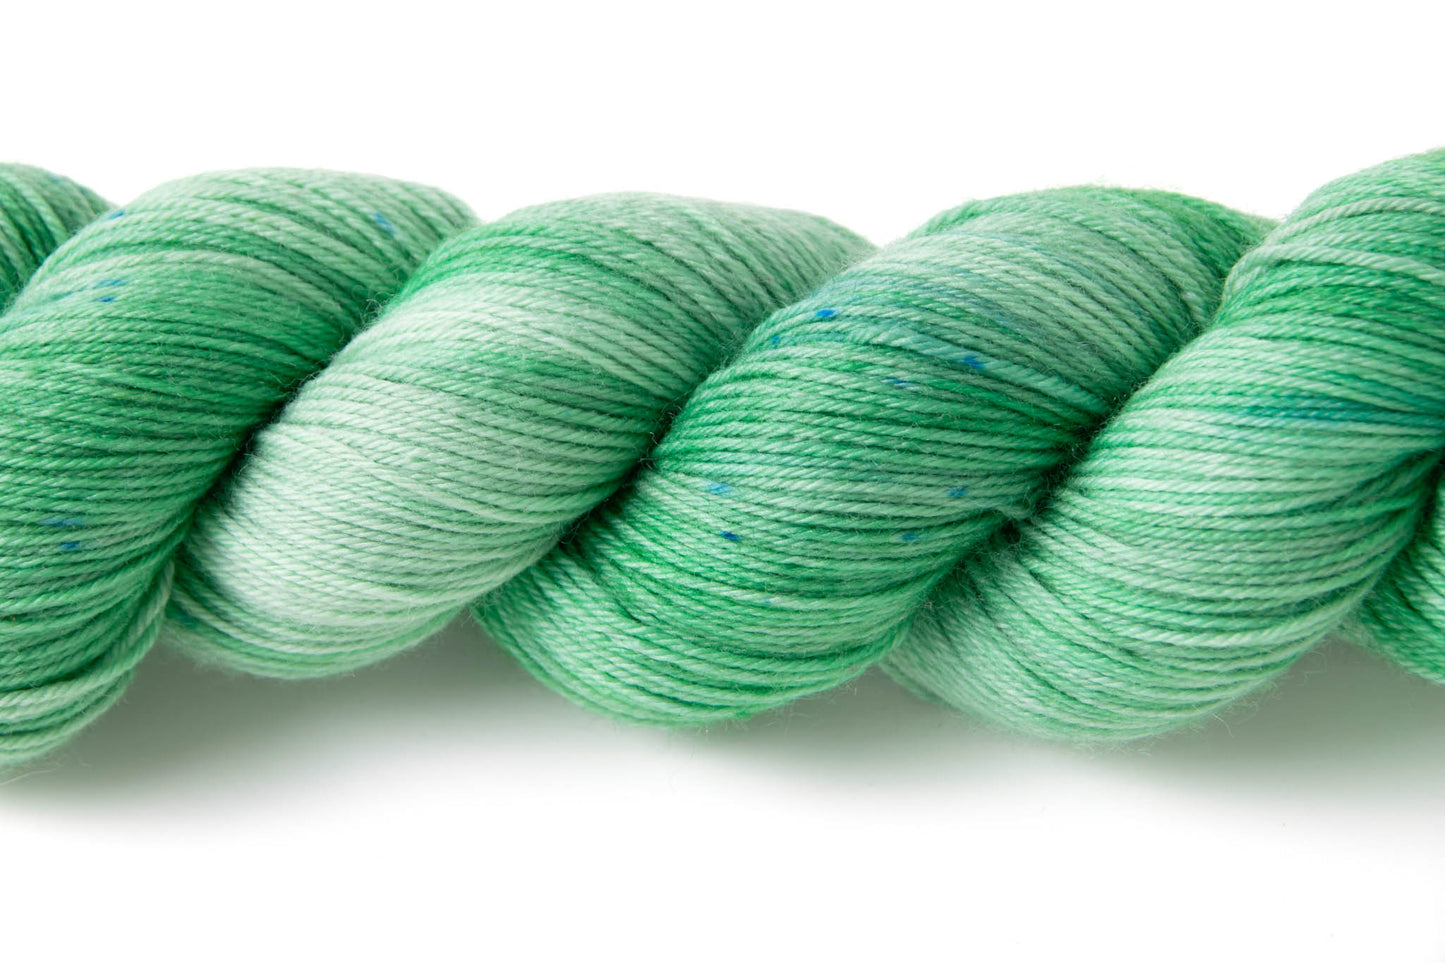 Close up on the tiny blue speckles in the colorway, and the variation in depth of shade of the green.